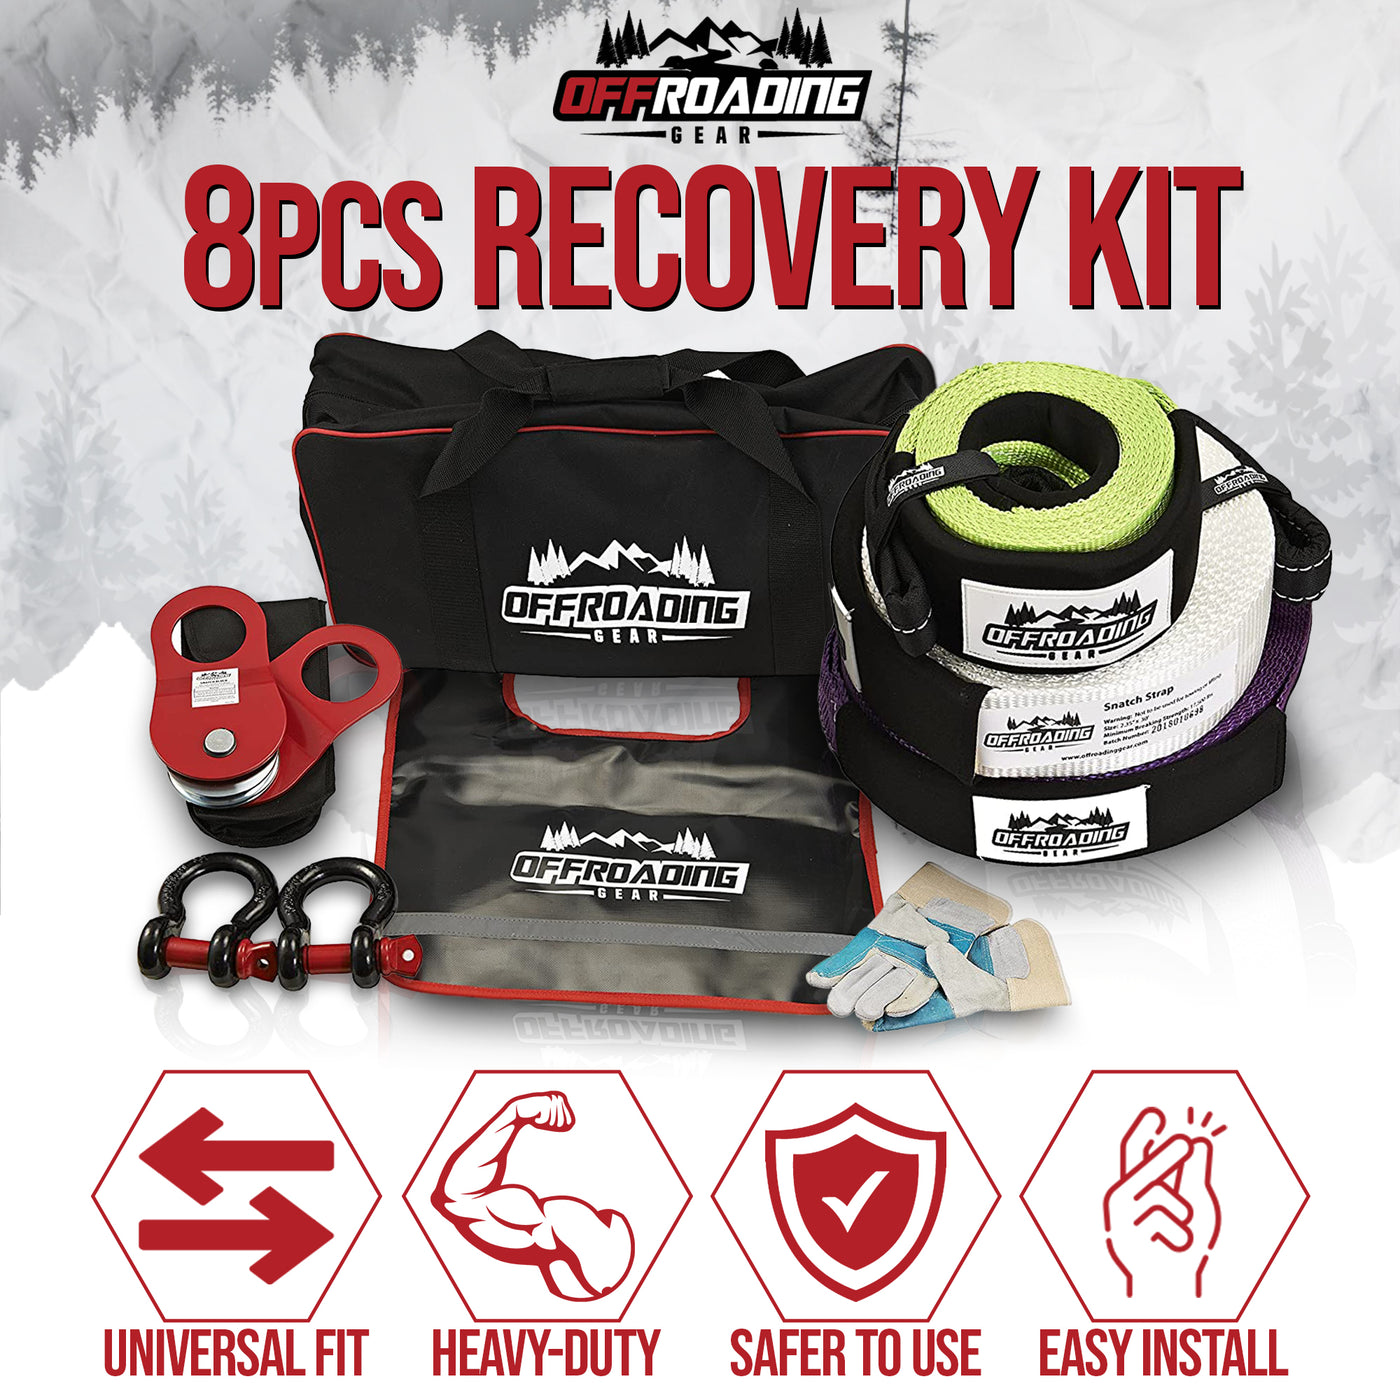 8 Piece 4x4 Recovery Kit with Snatch Straps, Winch Extension